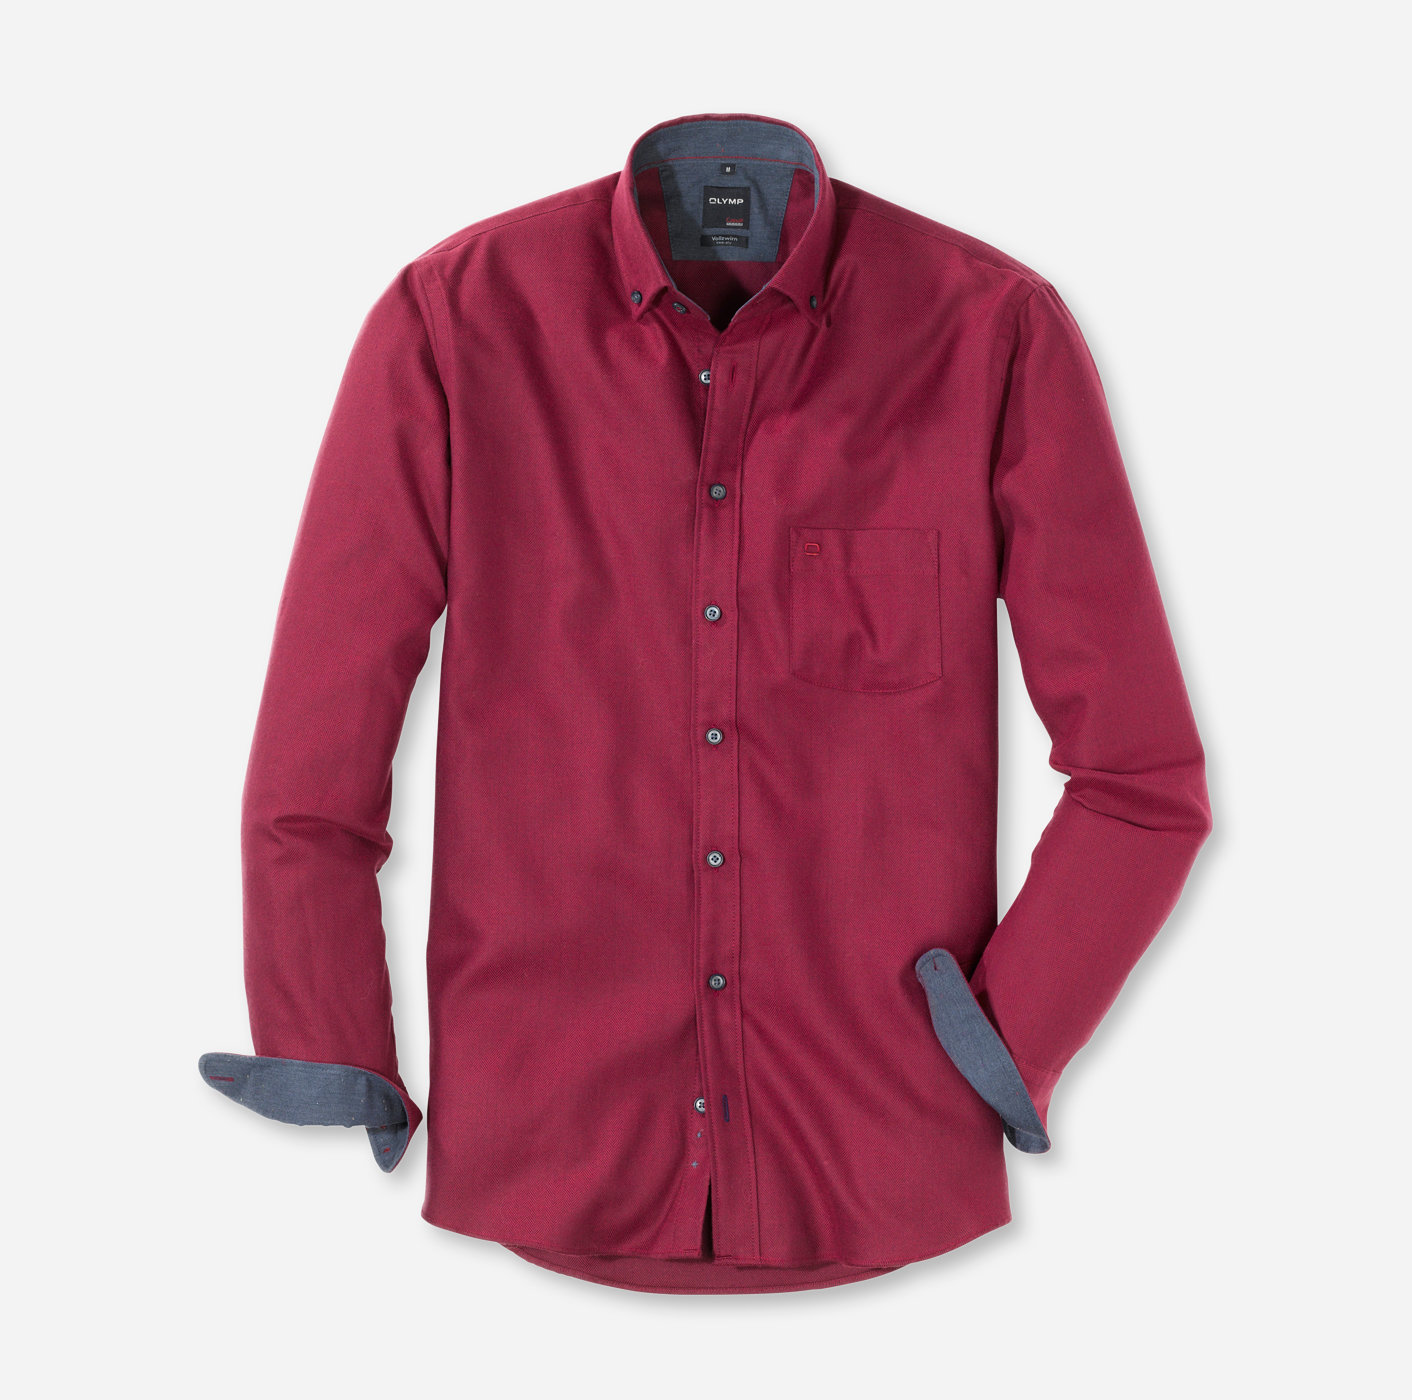 OLYMP Casual, modern fit, Freizeithemd, Button-down, Rot